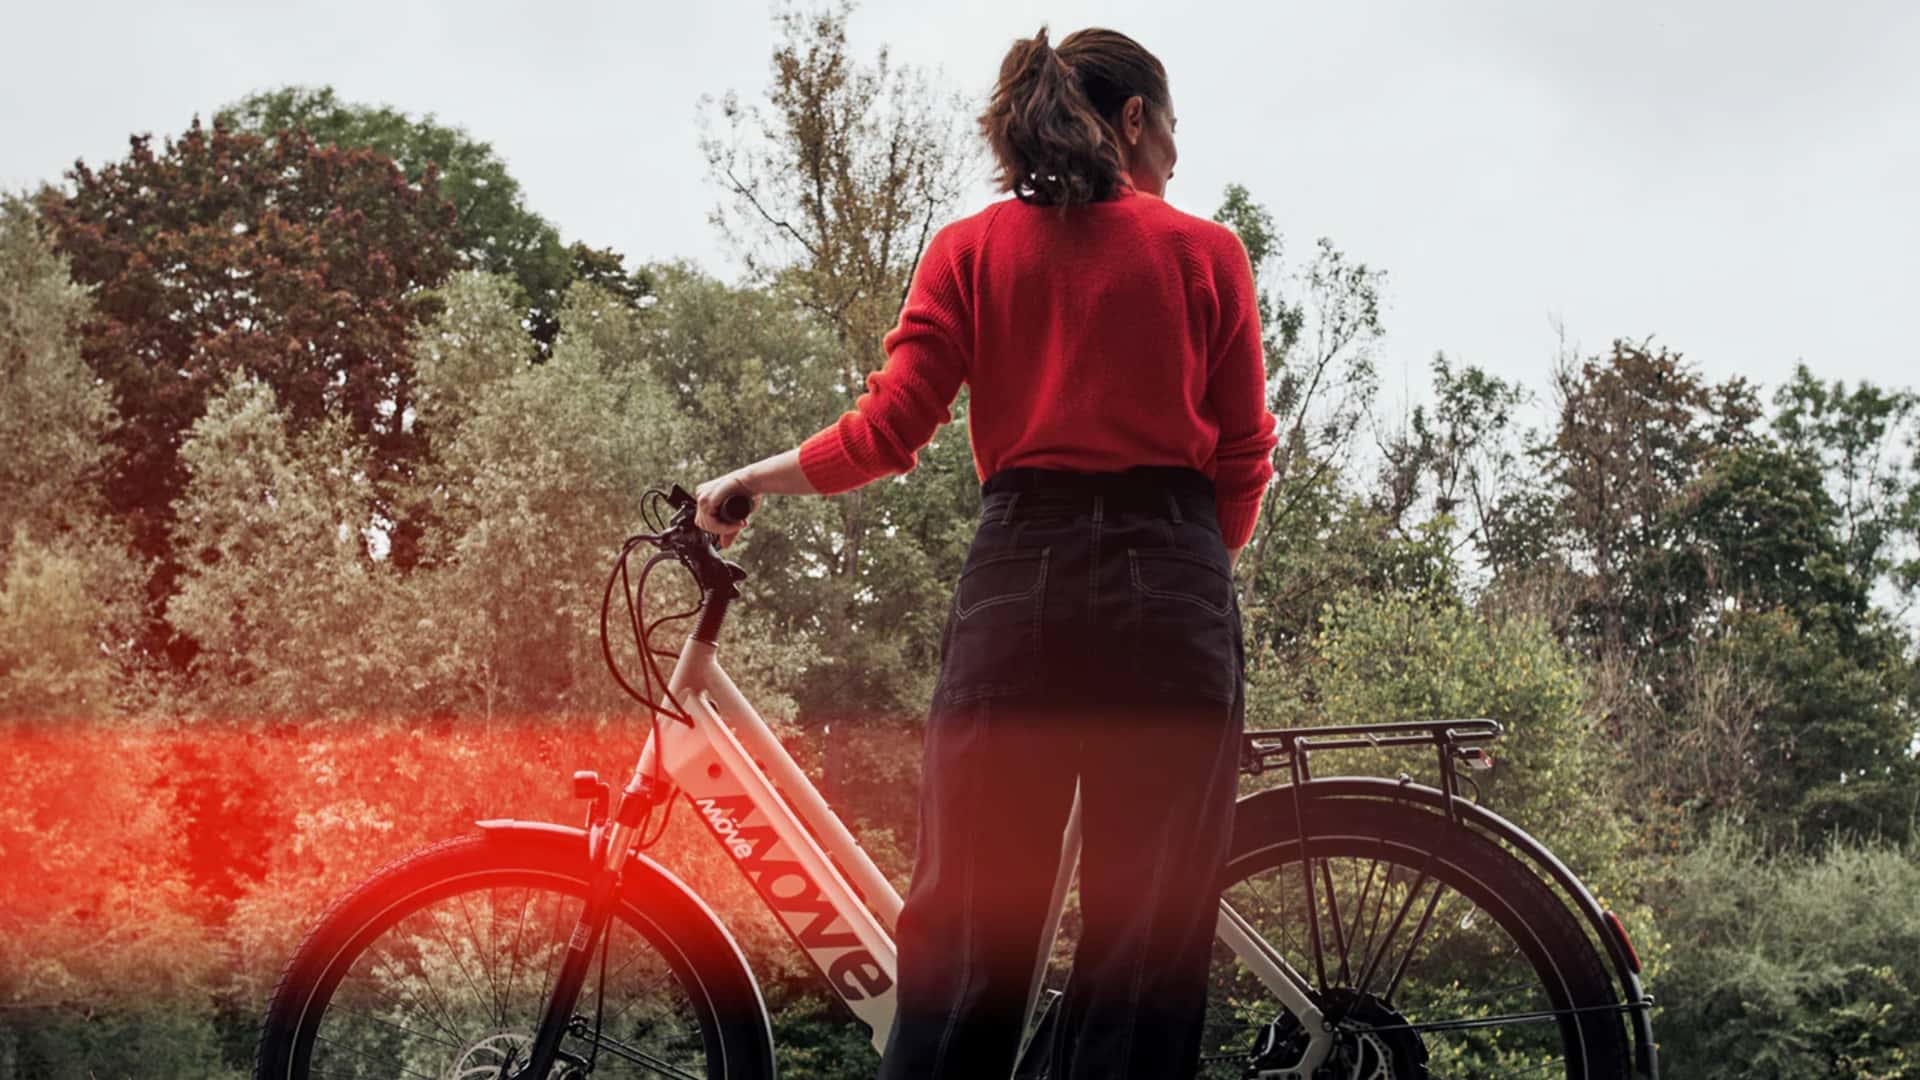 german bike brand move presents new voyager v10 commuter e bike - Möve Introduces the Voyager V10, a Premium Electric Bike for Daily Commuters